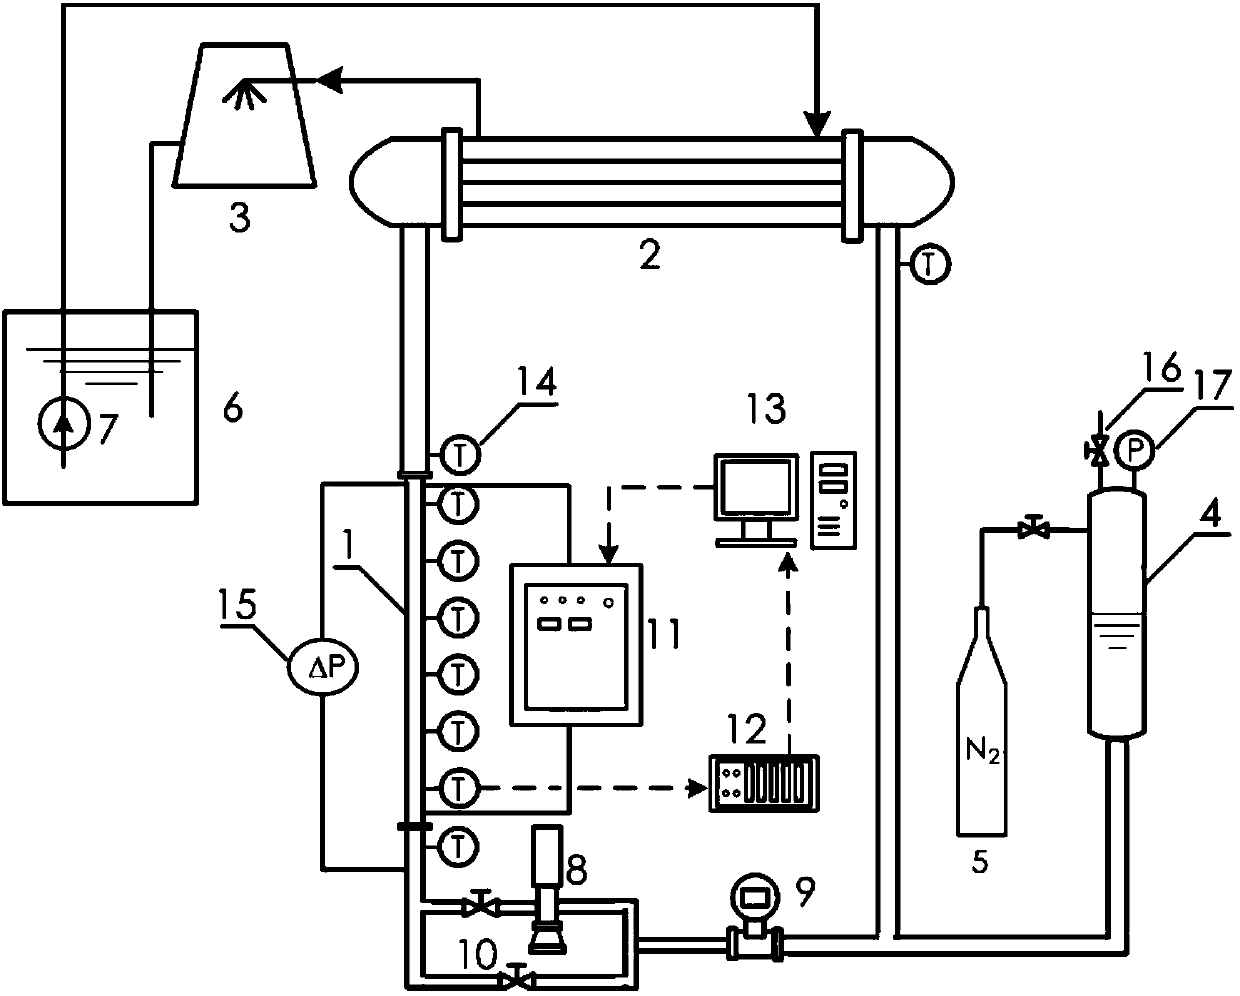 A control method for simulating the neutron reactivity feedback process of a nuclear reactor based on a thermal-hydraulic experimental device for simulating the neutron reactivity feedback process of a nuclear reactor